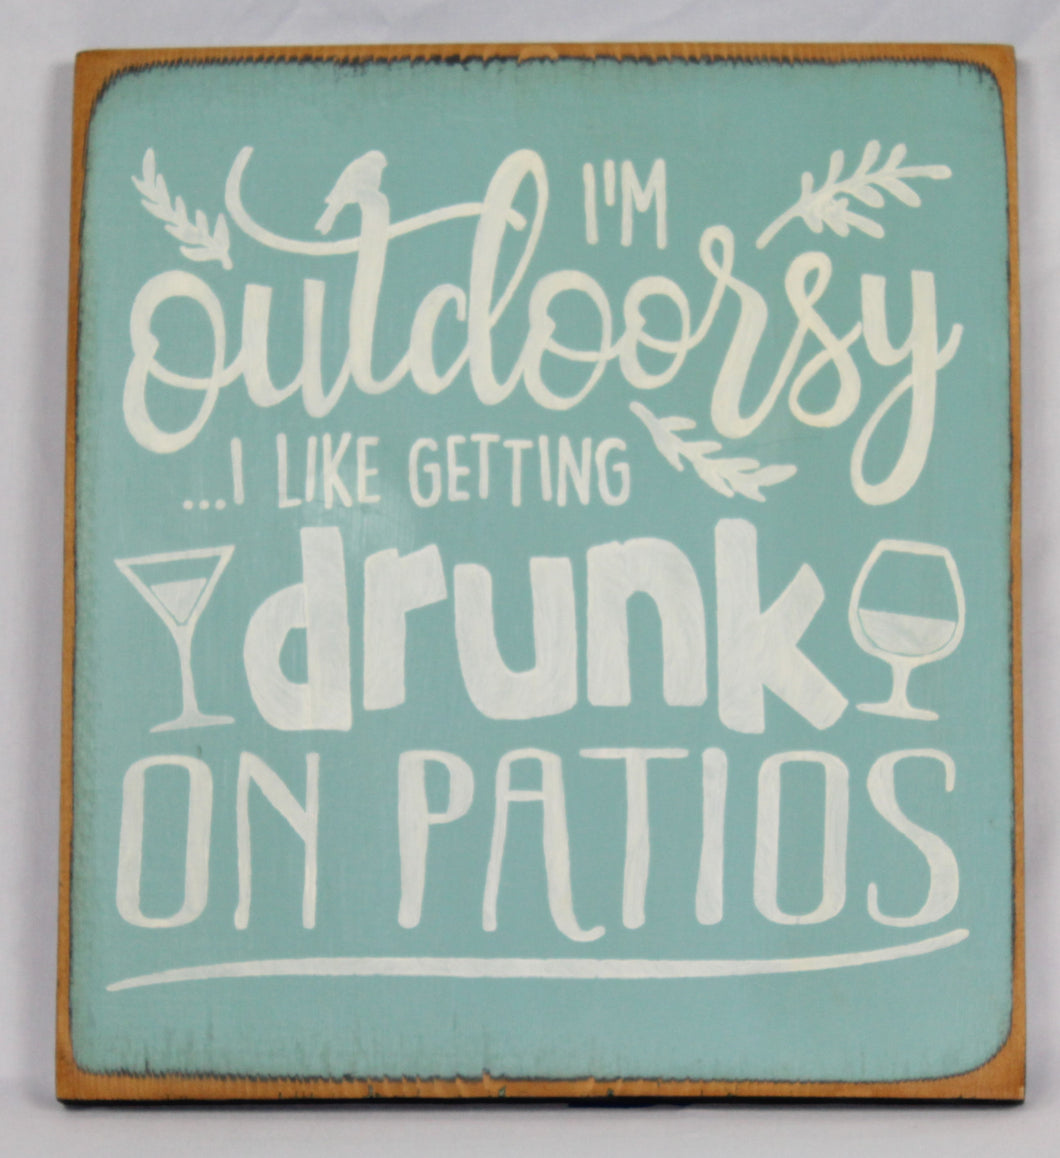 I'm Outdoorsy Painted Wooden SIgn